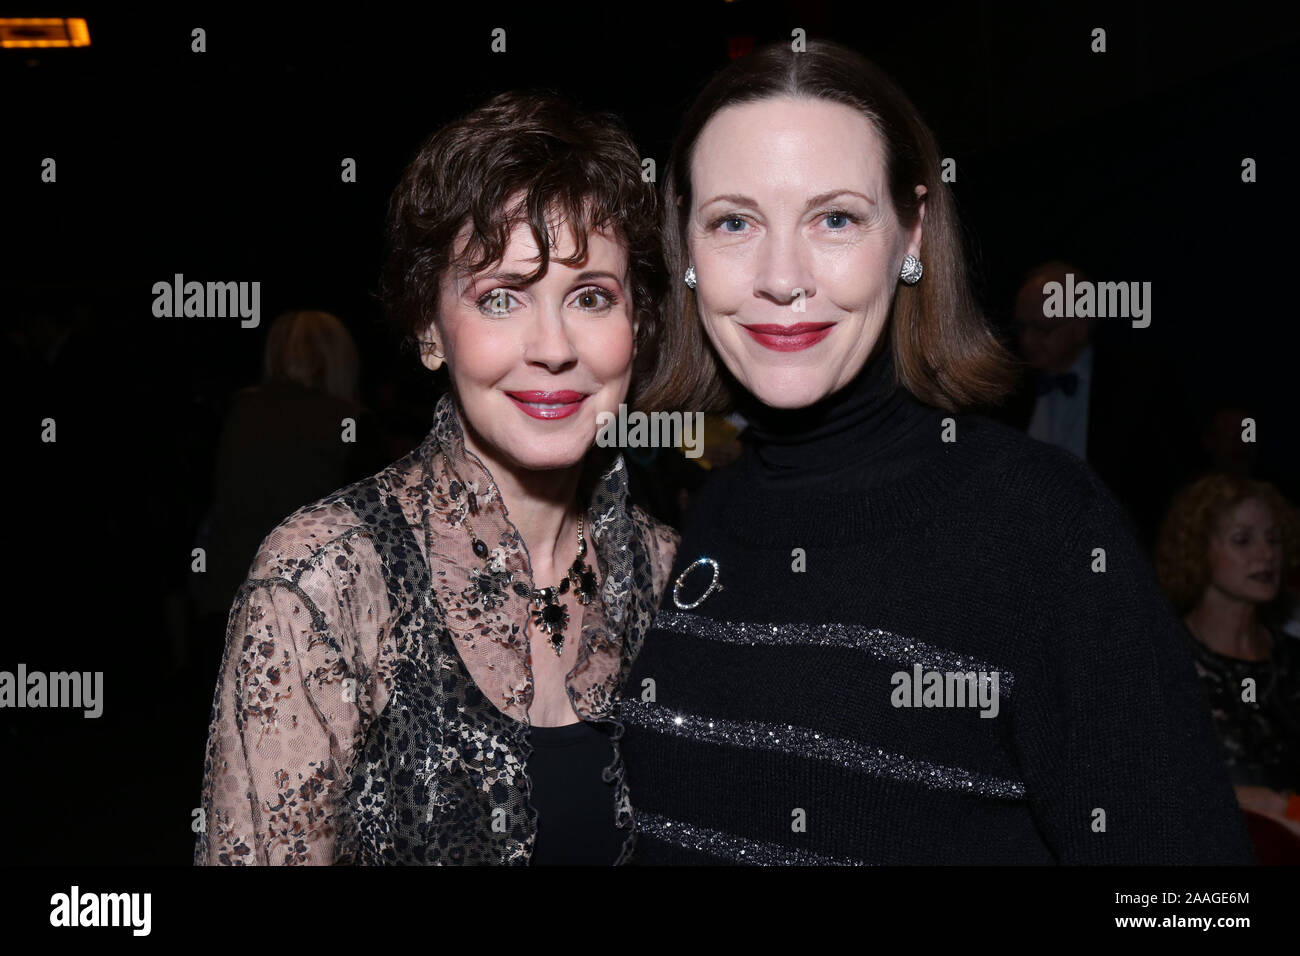 Red Bull Theater Benefit Concert of Return To The Forbidden Planet at Symphony Space - Arrivals. Featuring: Crista Moore, Veanne Cox Where: New York, New York, United States When: 22 Oct 2019 Credit: Joseph Marzullo/WENN.com Stock Photo